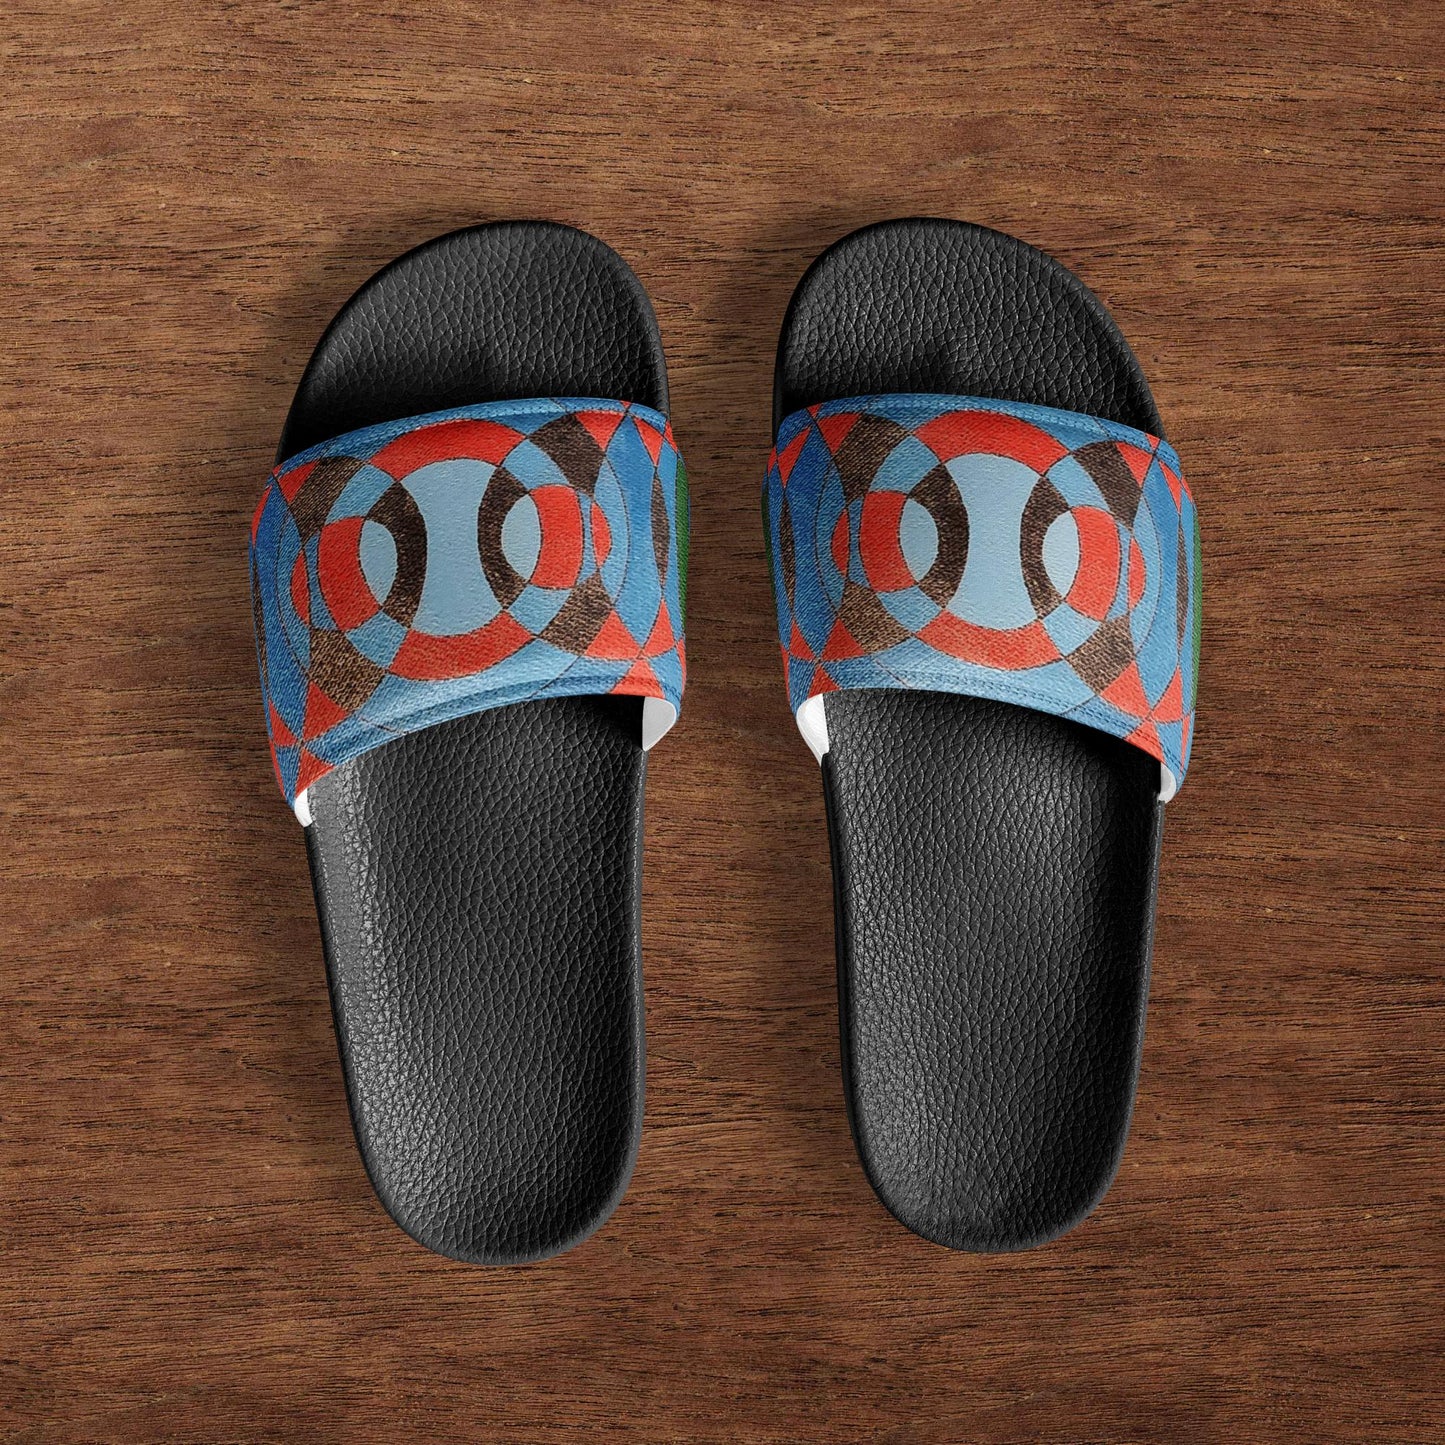 Never-ending circles Women's slides in red, blue and black